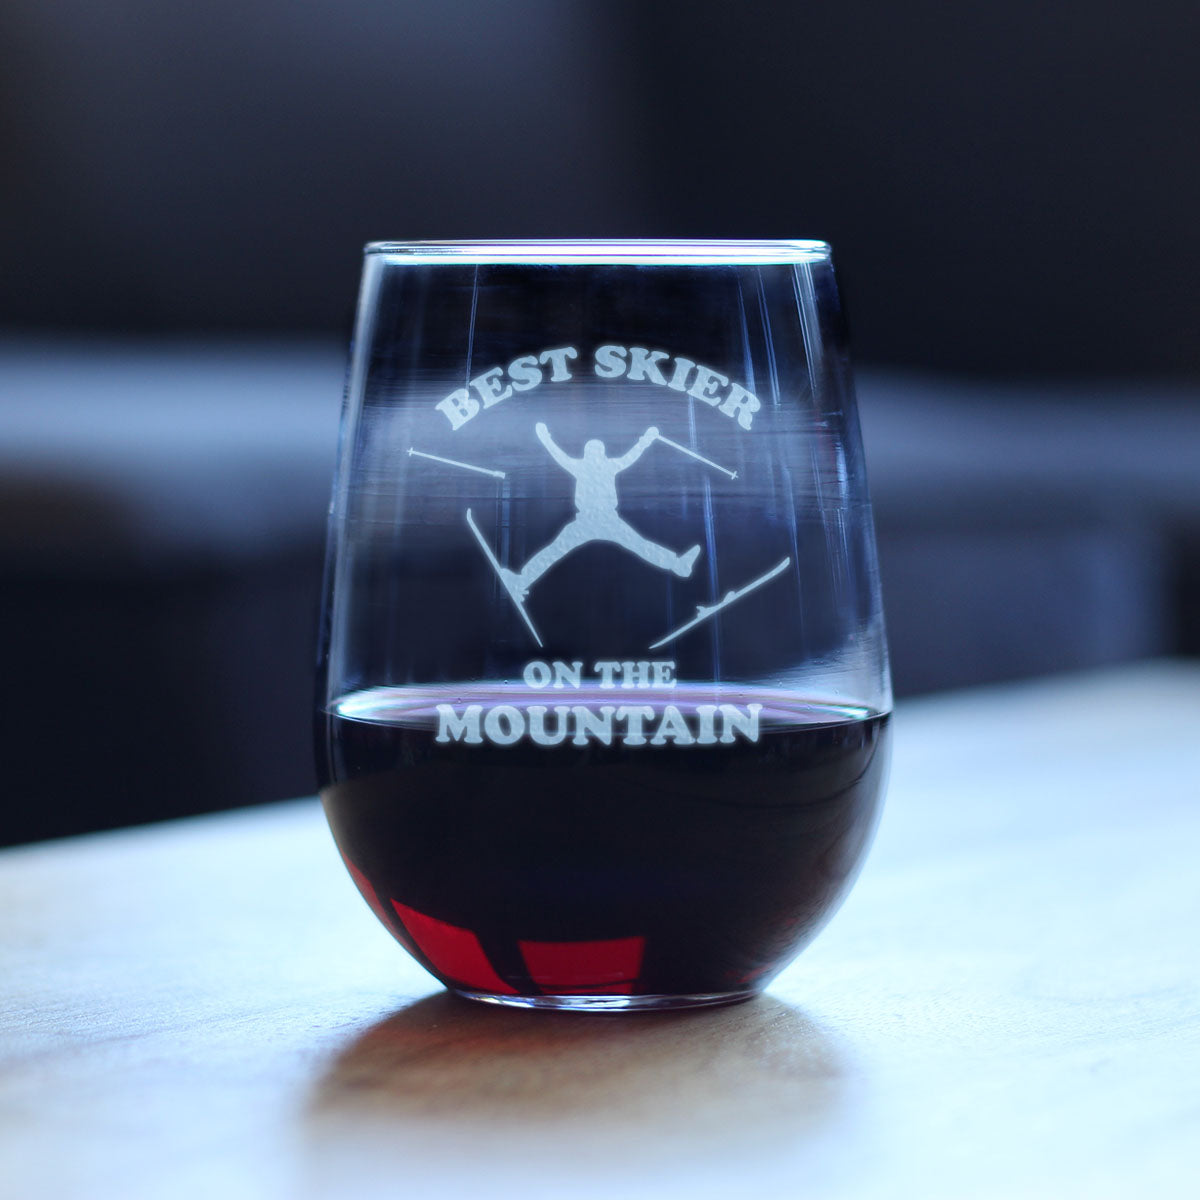 Best Skier - Stemless Wine Glass - Unique Skiing Themed Decor and Gifts for Mountain Lovers - Large 17 Oz Glasses